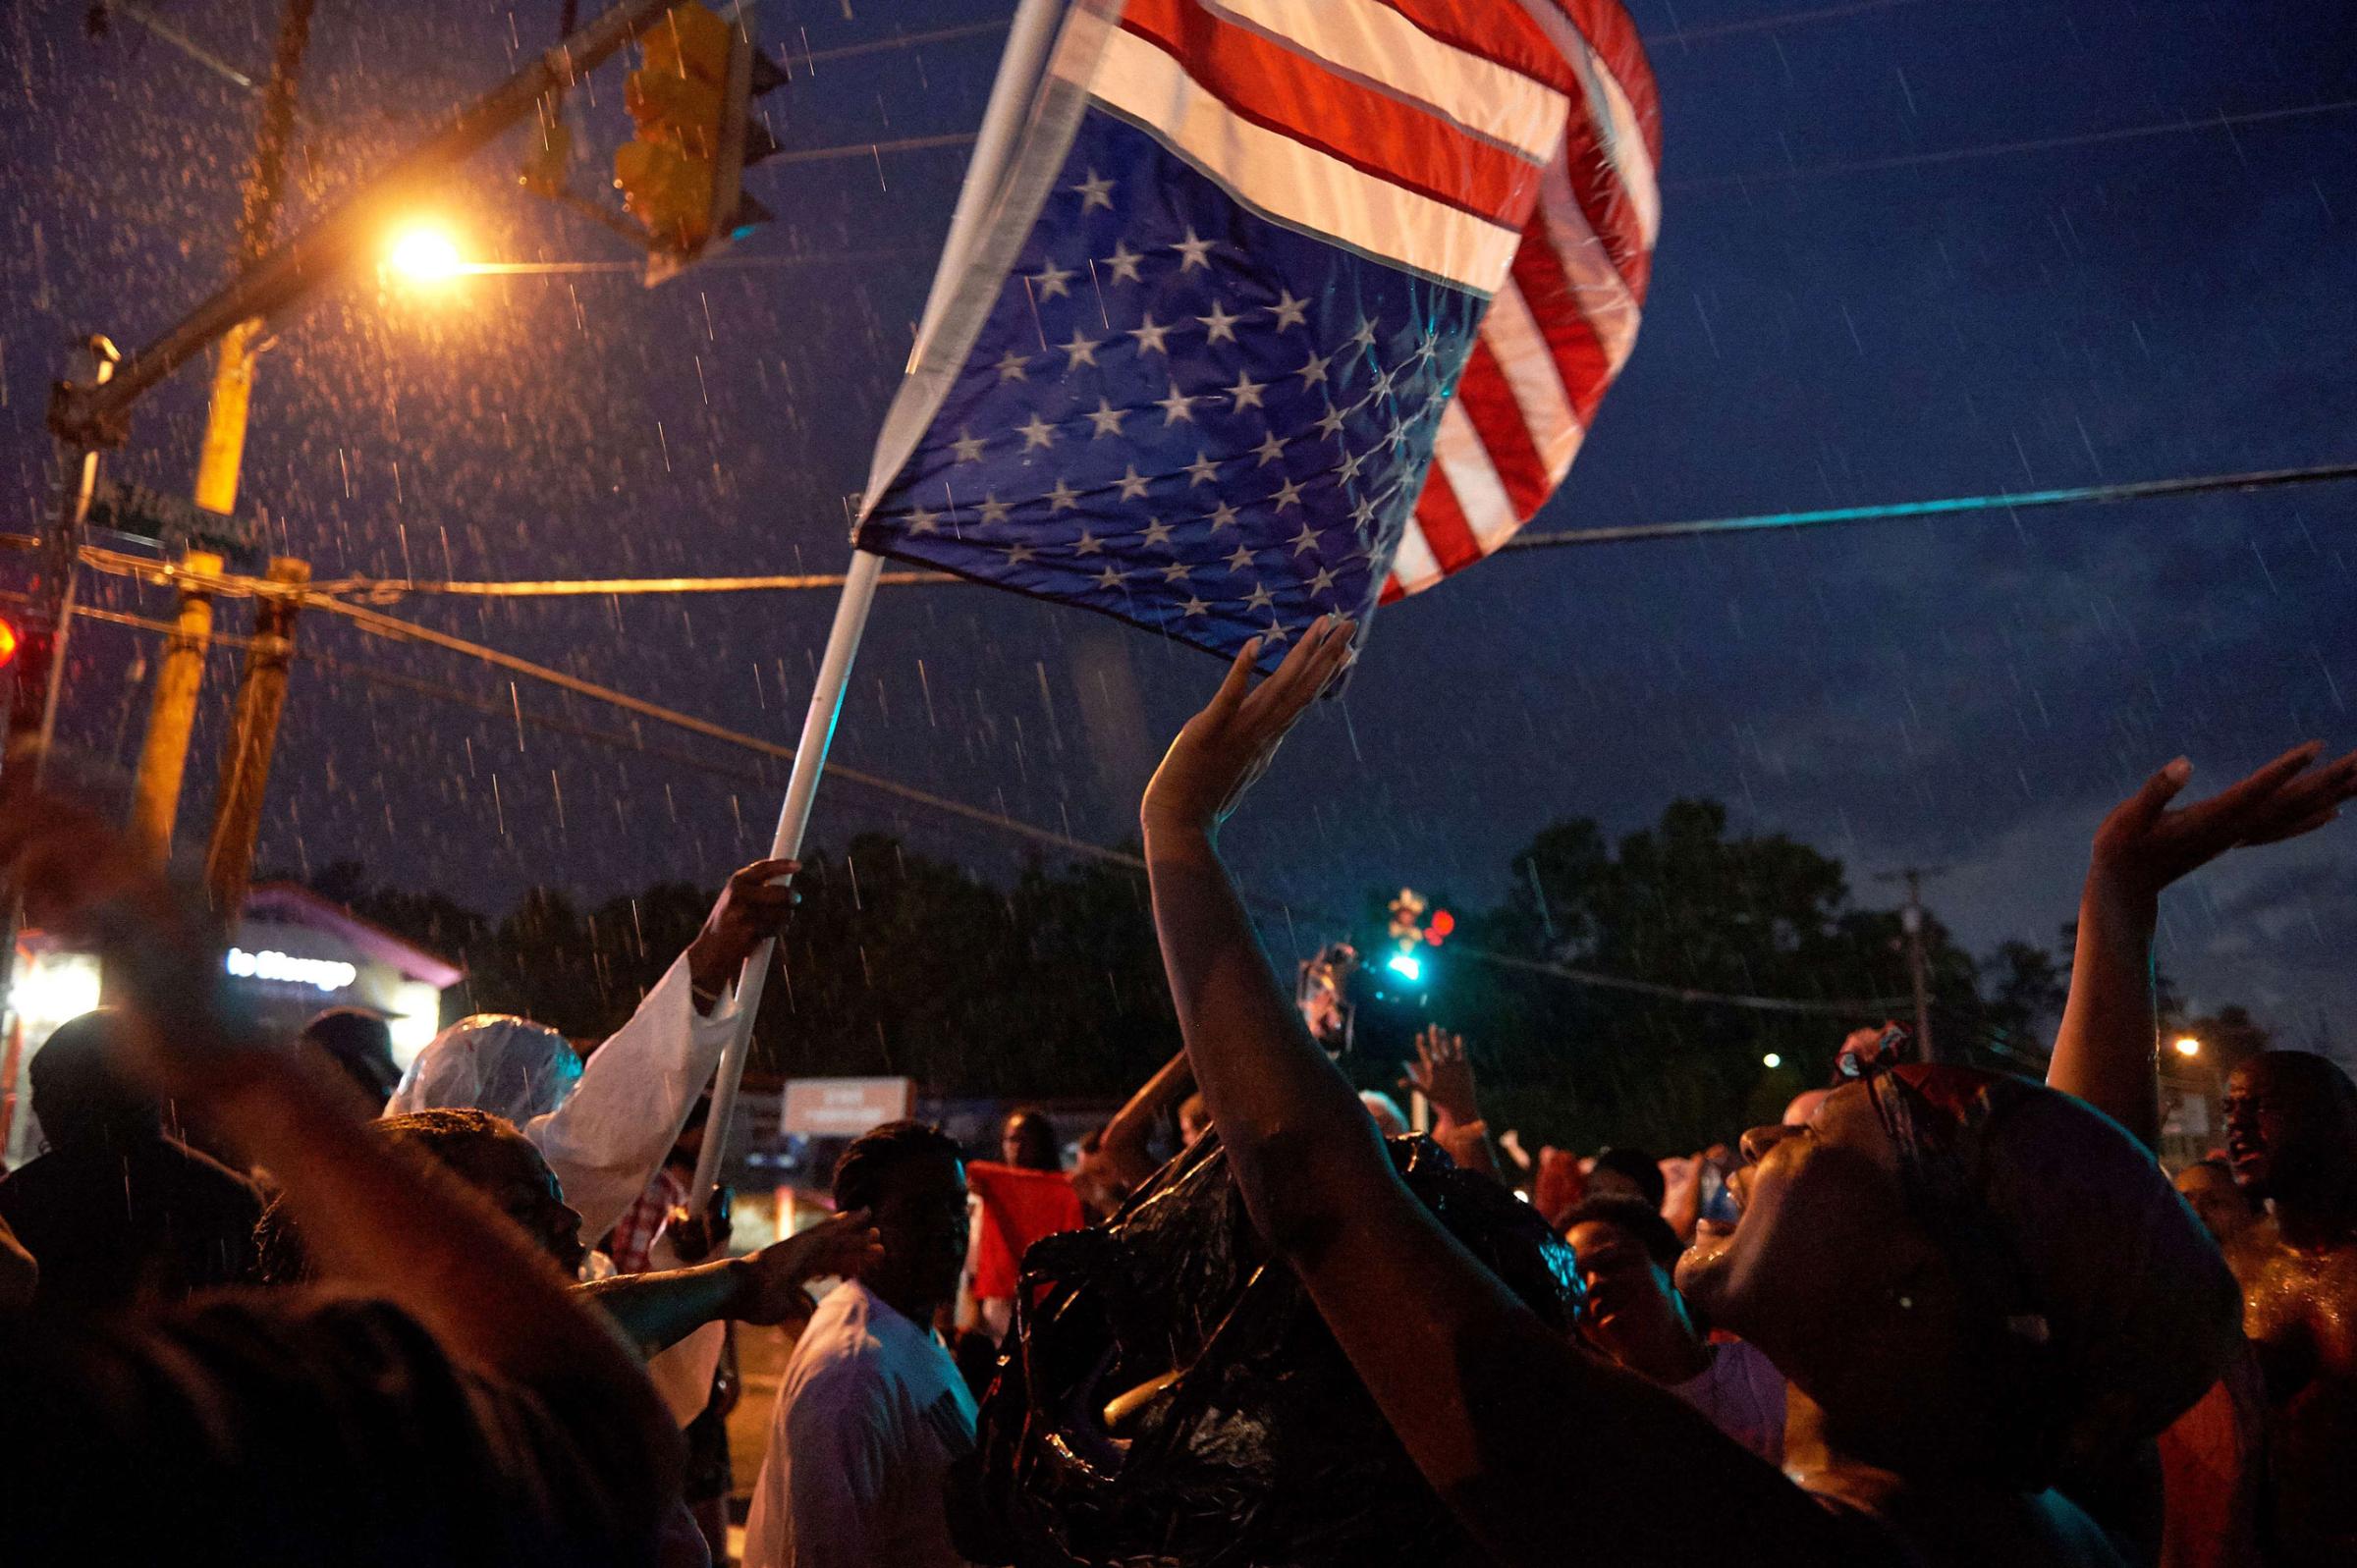 TOPSHOTS Demonstrators participate in a protest march on West Florissant Avenue in Ferguson, Missouri on August 9, 2015. A day of peaceful remembrance marking the anniversary of 18-year-old black teen Michael Brown's killing by police in the US city of Ferguson came to a violent end on August 9 as gunfire left at least one protester injured. AFP PHOTO / MICHAEL B. THOMASMichael B. Thomas/AFP/Getty Images